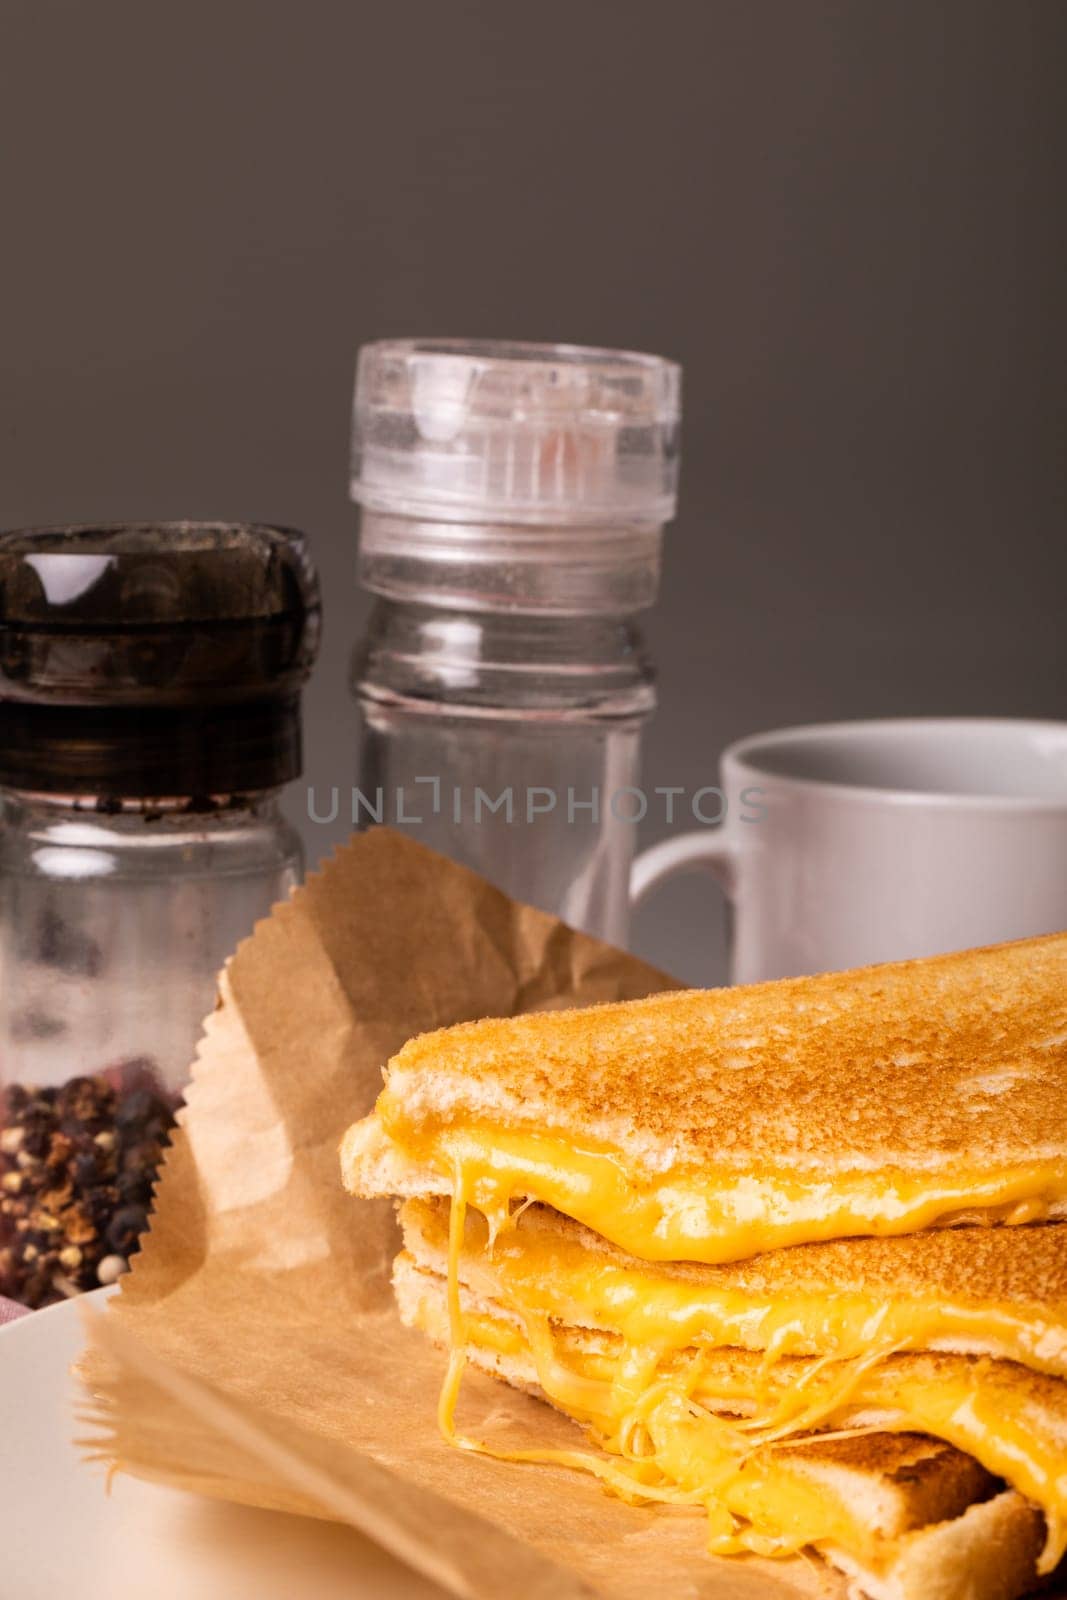 Close-up of fresh cheese sandwich on wax paper by peppercorn bottle and cup against gray background. unaltered, food, unhealthy eating and snack concept.